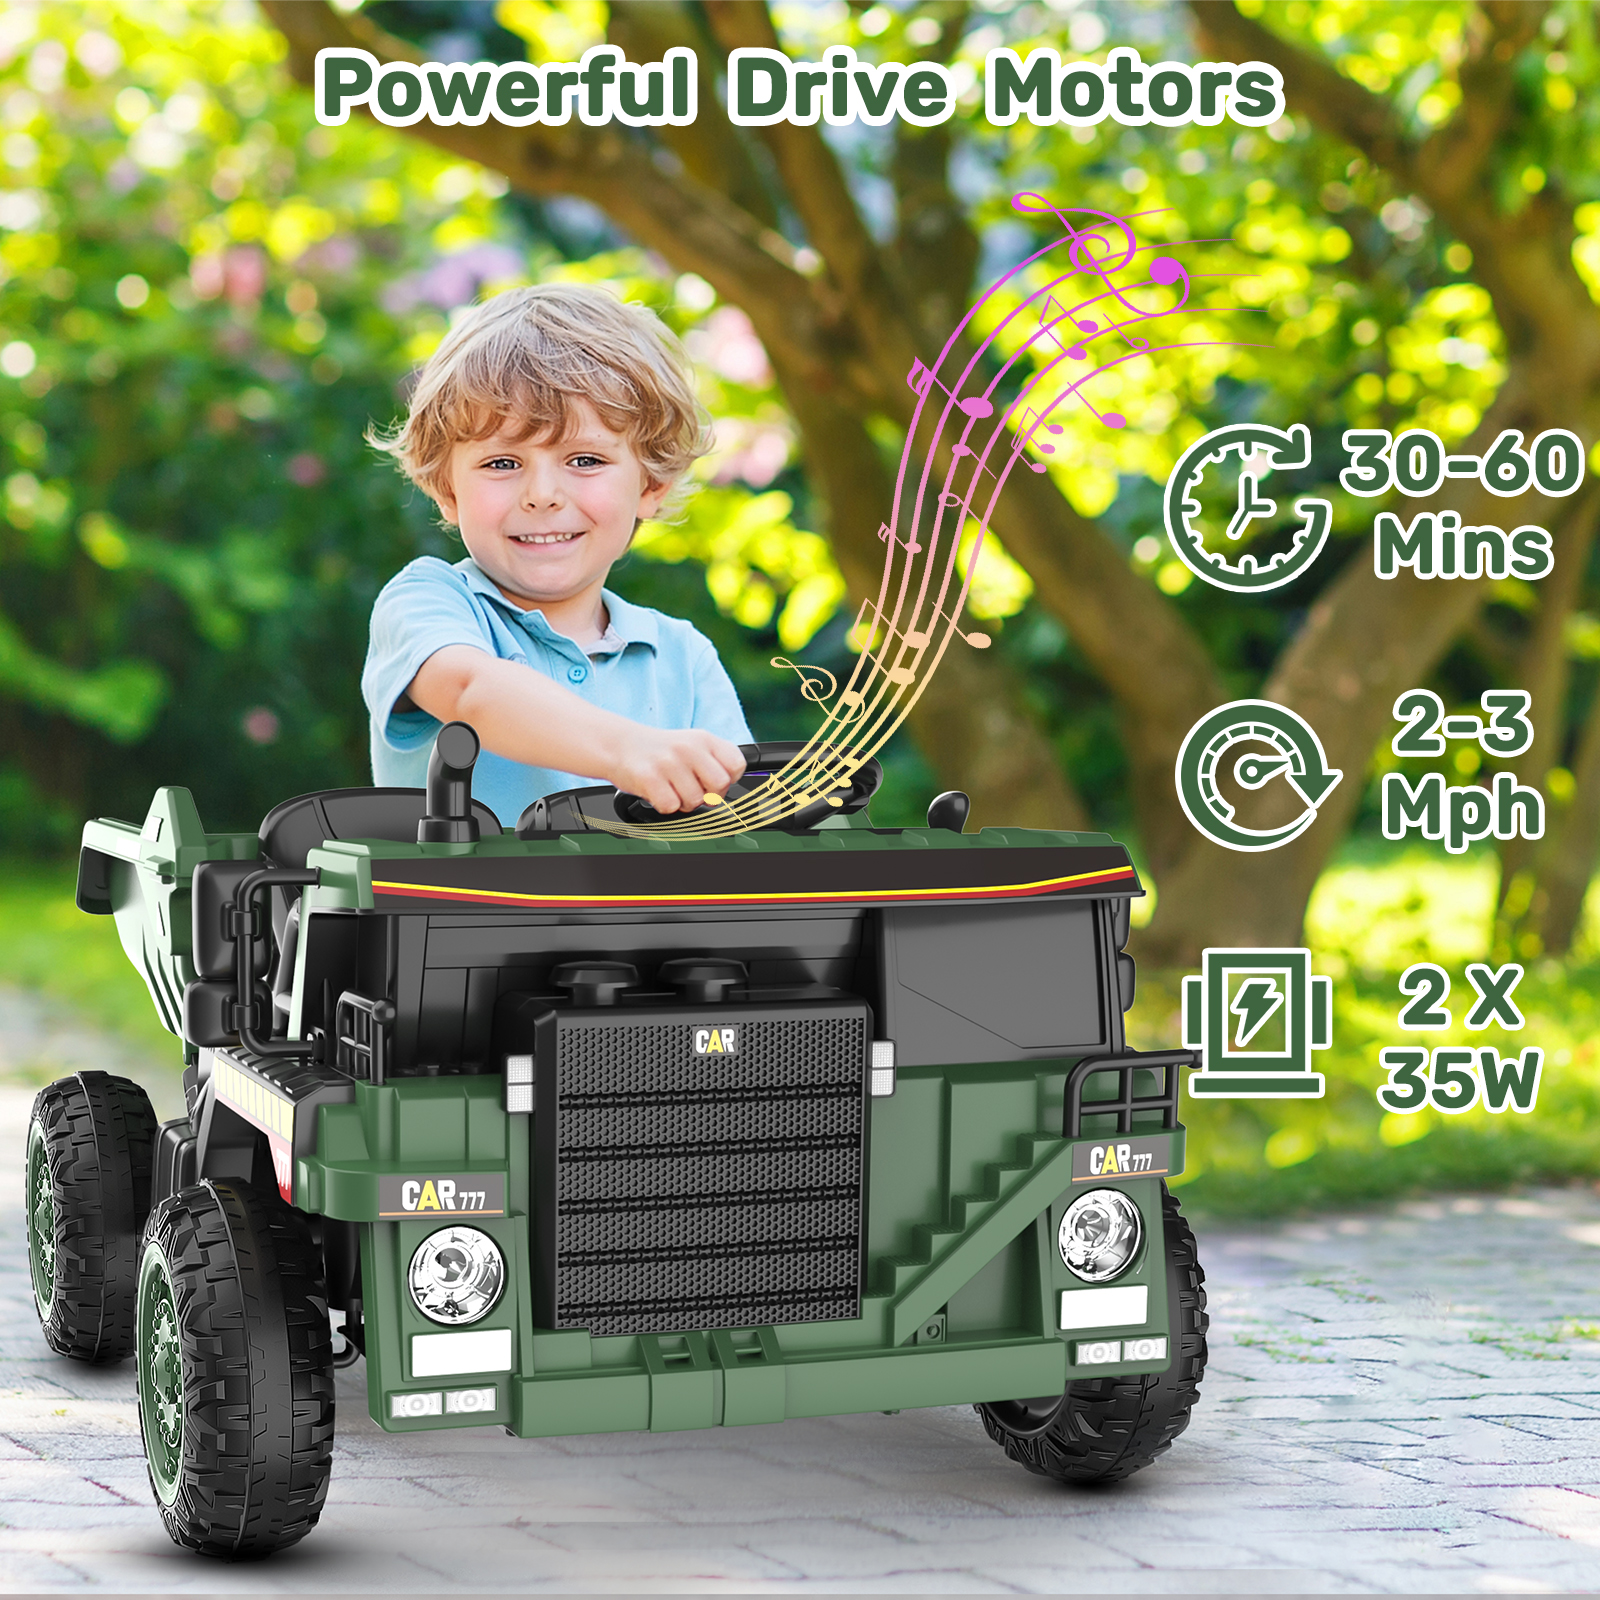 TOKTOO 12V Battery Powered Ride-on Dump Truck with Remote Control, Music Player, Electric Dump Bucket, Kids Tractor-Dark Green - image 3 of 7